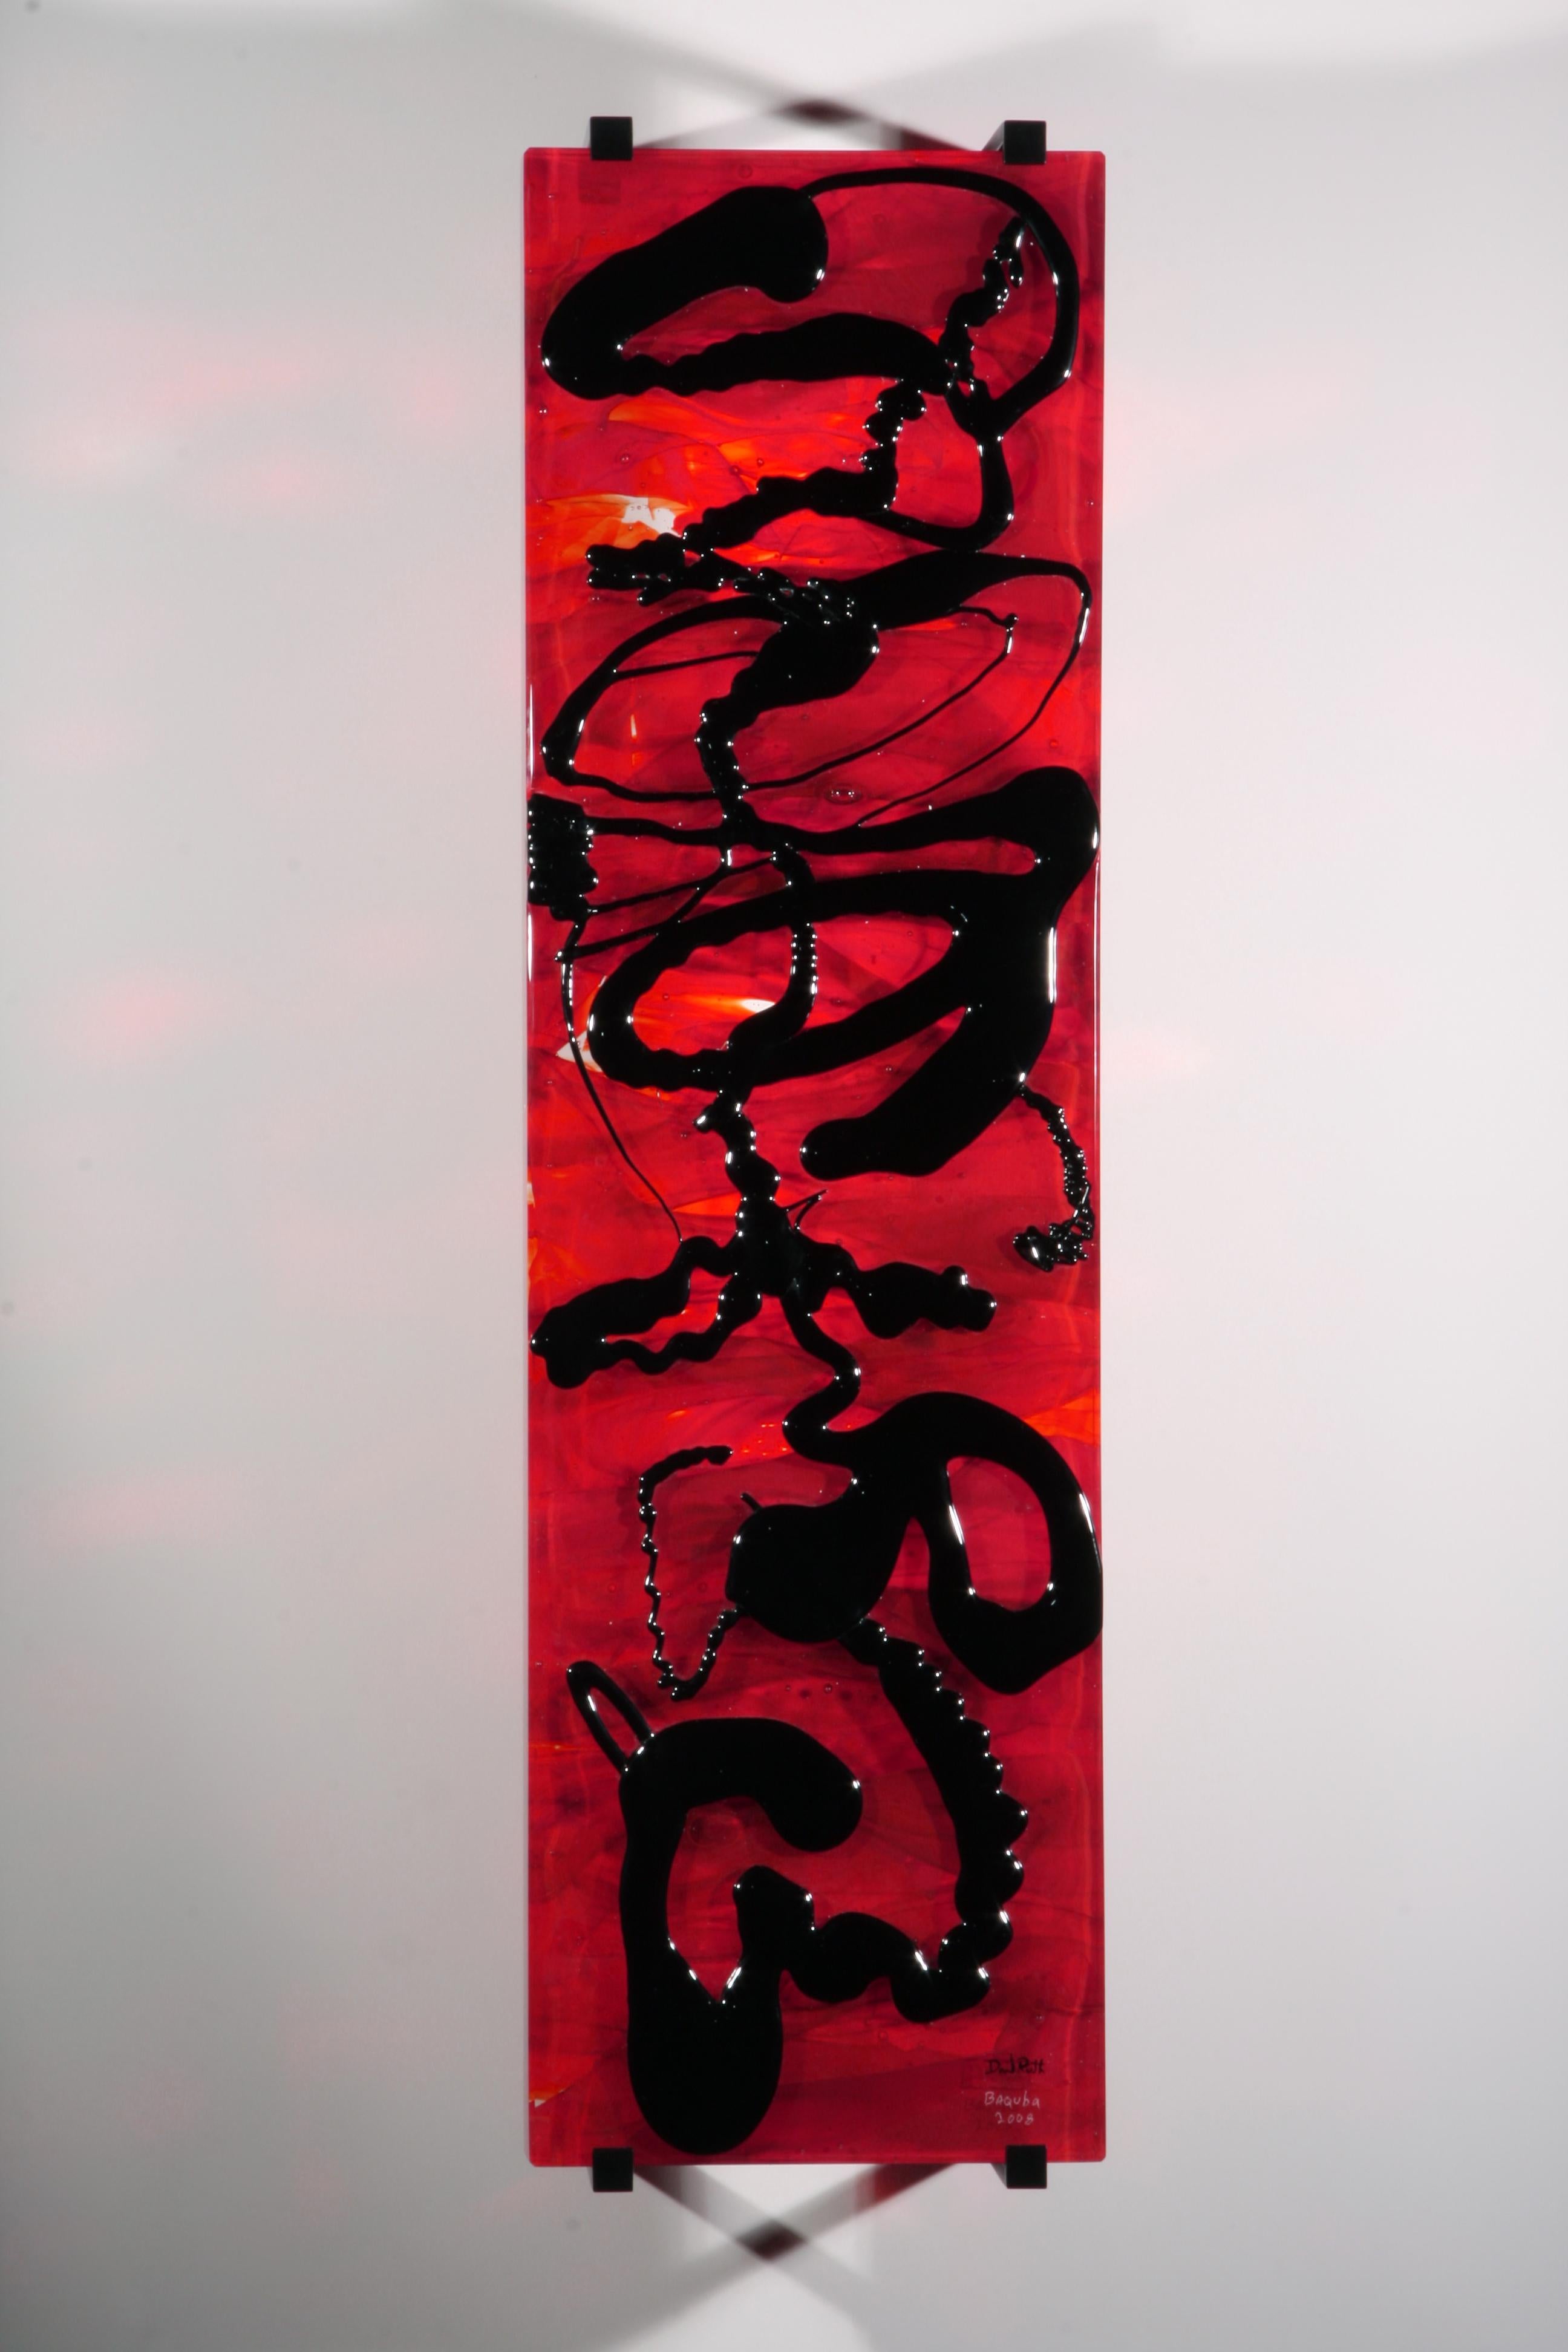 'Baquba' is a contemporary abstract glass by artist David Ruth. Created in 2008, it was a piece in a series about the David's views on the American invasion of Iraq. 

"In 2005, a few years after the American invasion of Iraq, I conceptualized a